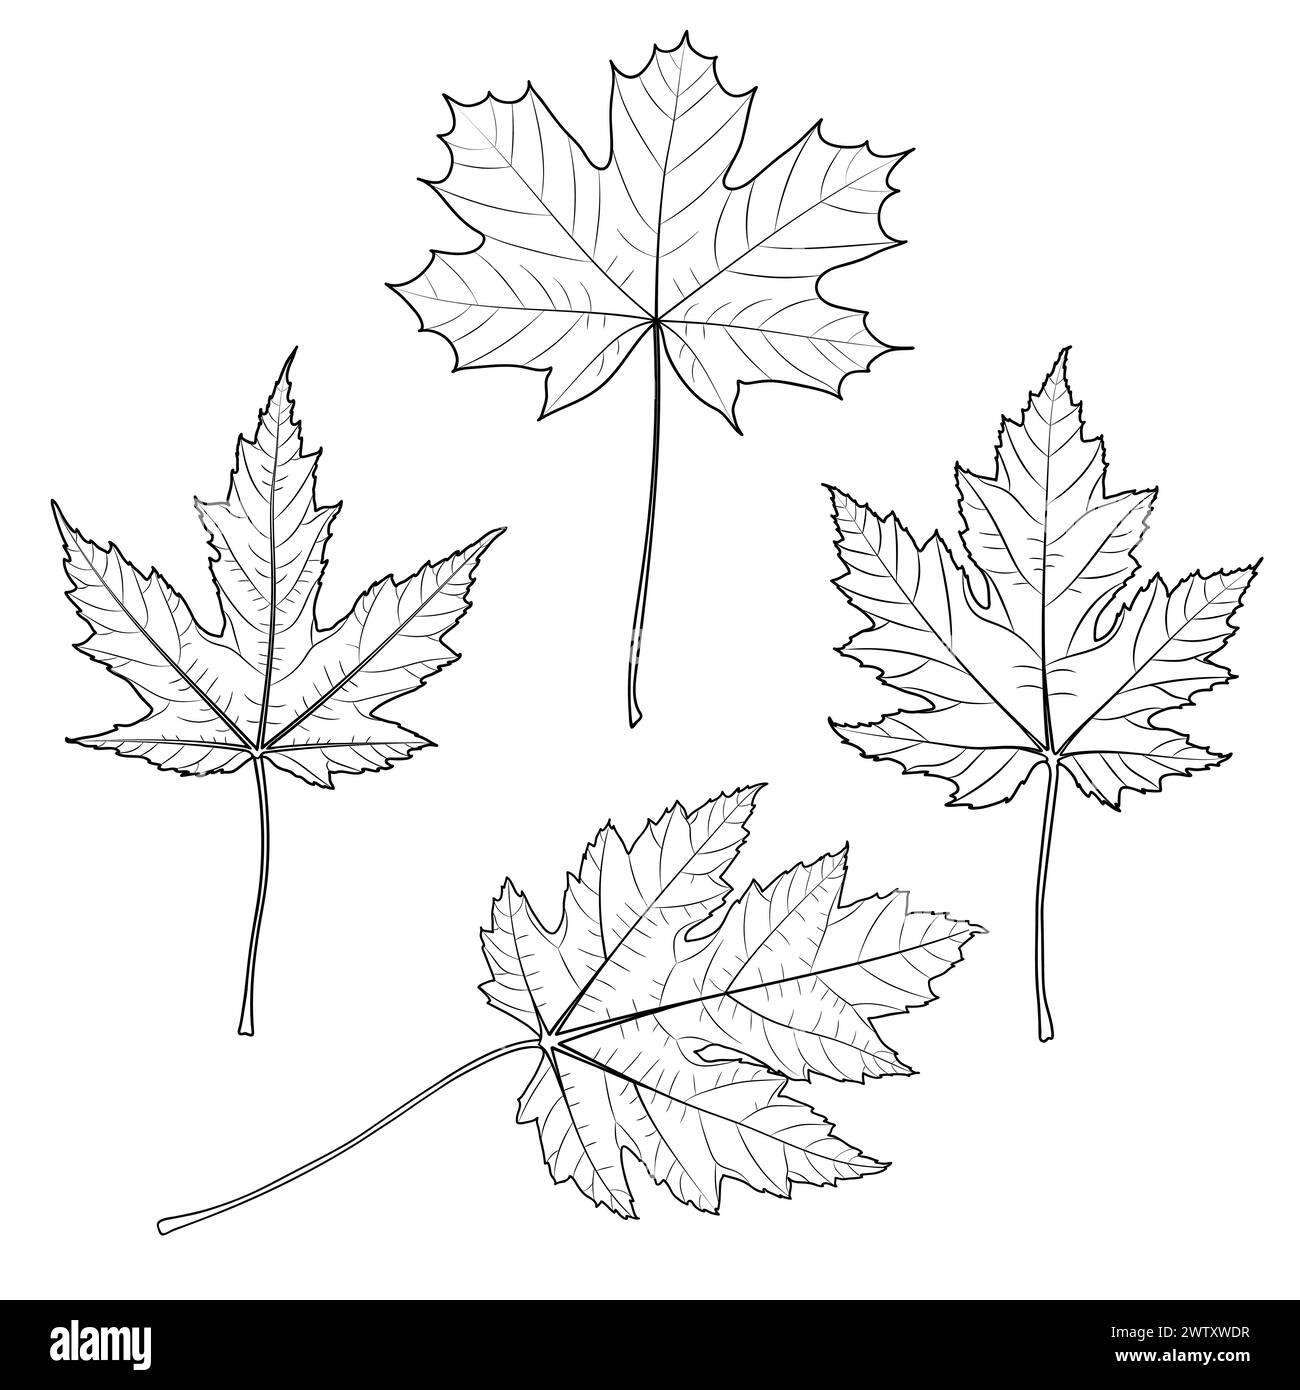 Maple outline leaf collection, vector botanical illustration. Bigleaf, silver, sugar, red maple tree leaves. Coloring book page. Stock Vector